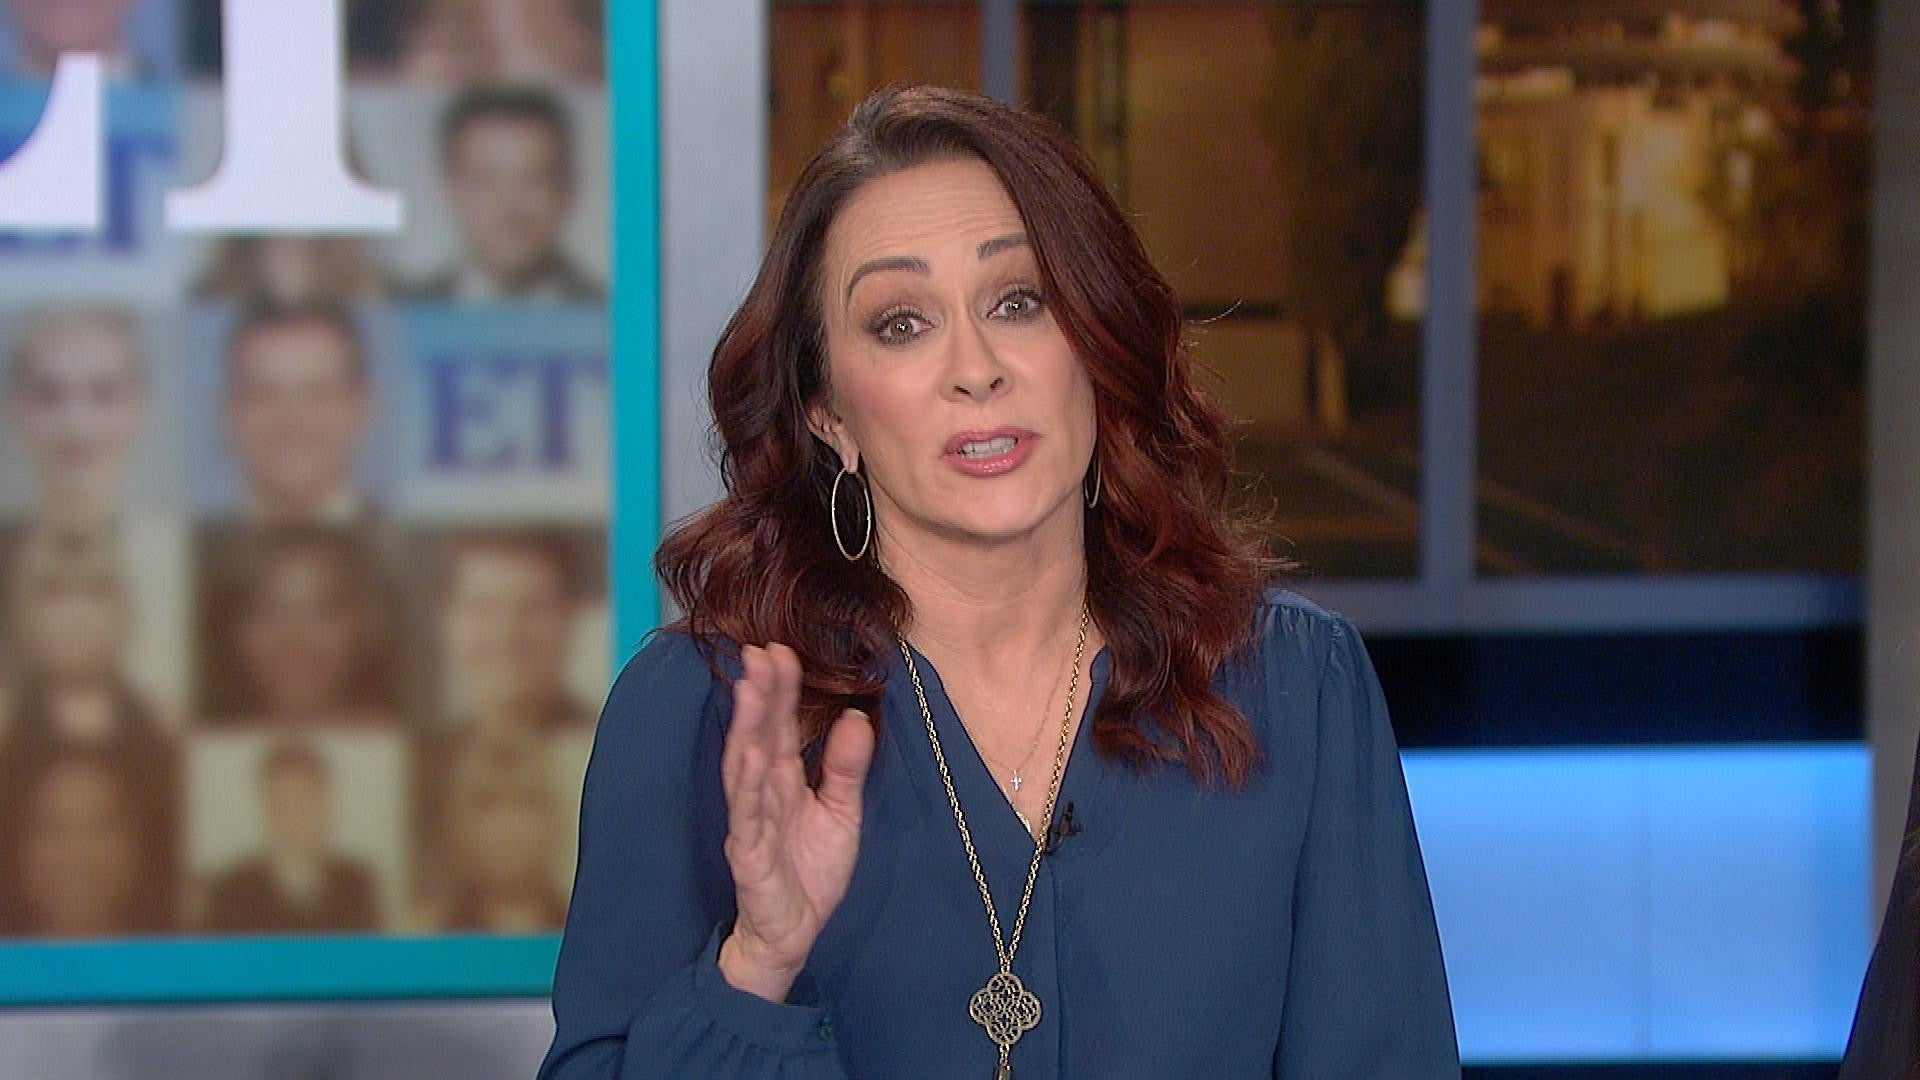 Patricia heaton top best naked photos - Adult videos